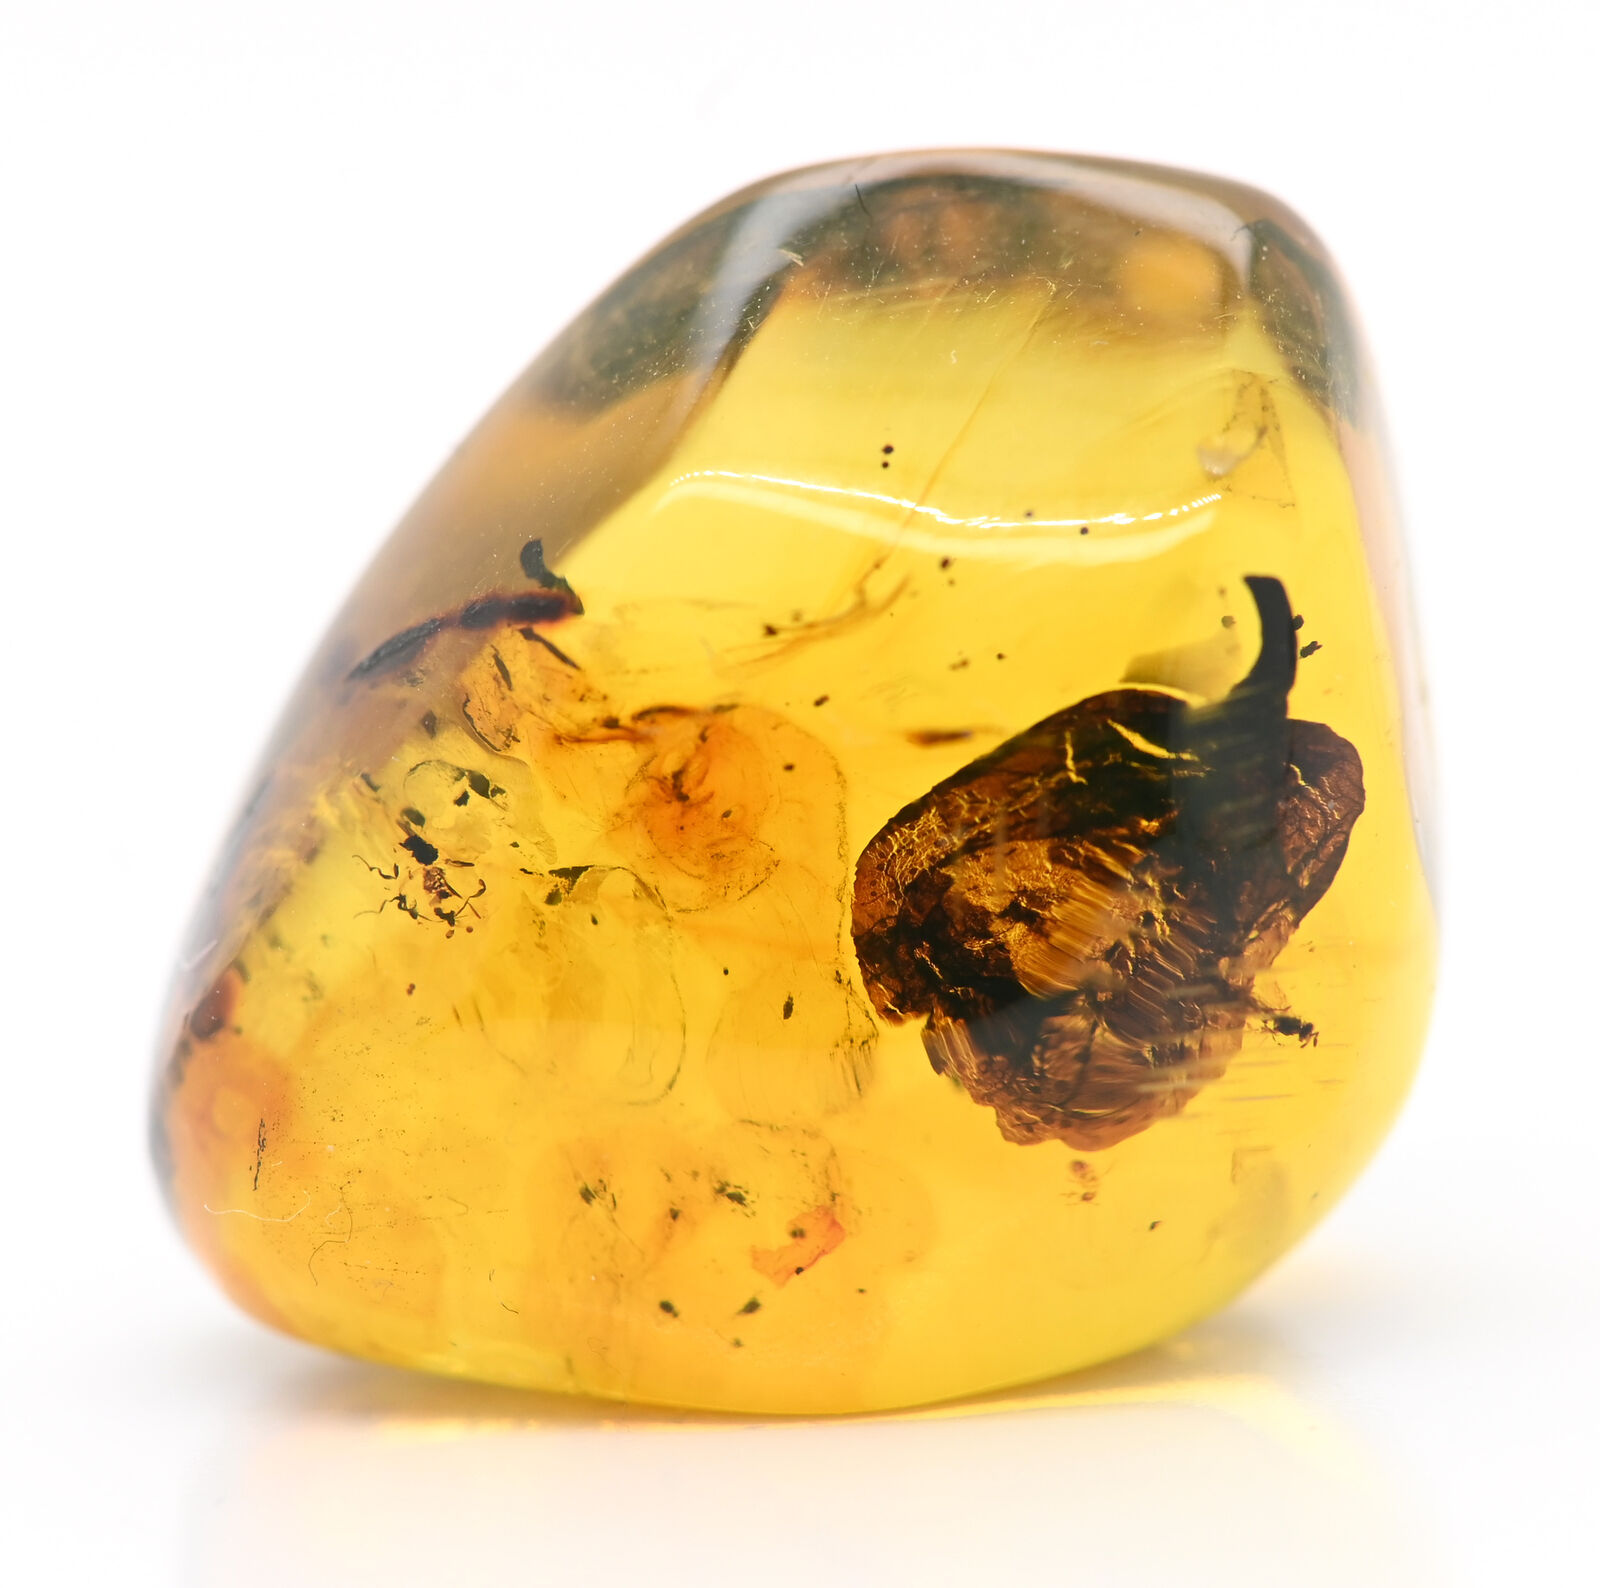 Interesting Botanical Flower Petal, Fossil Inclusion in Dominican Amber